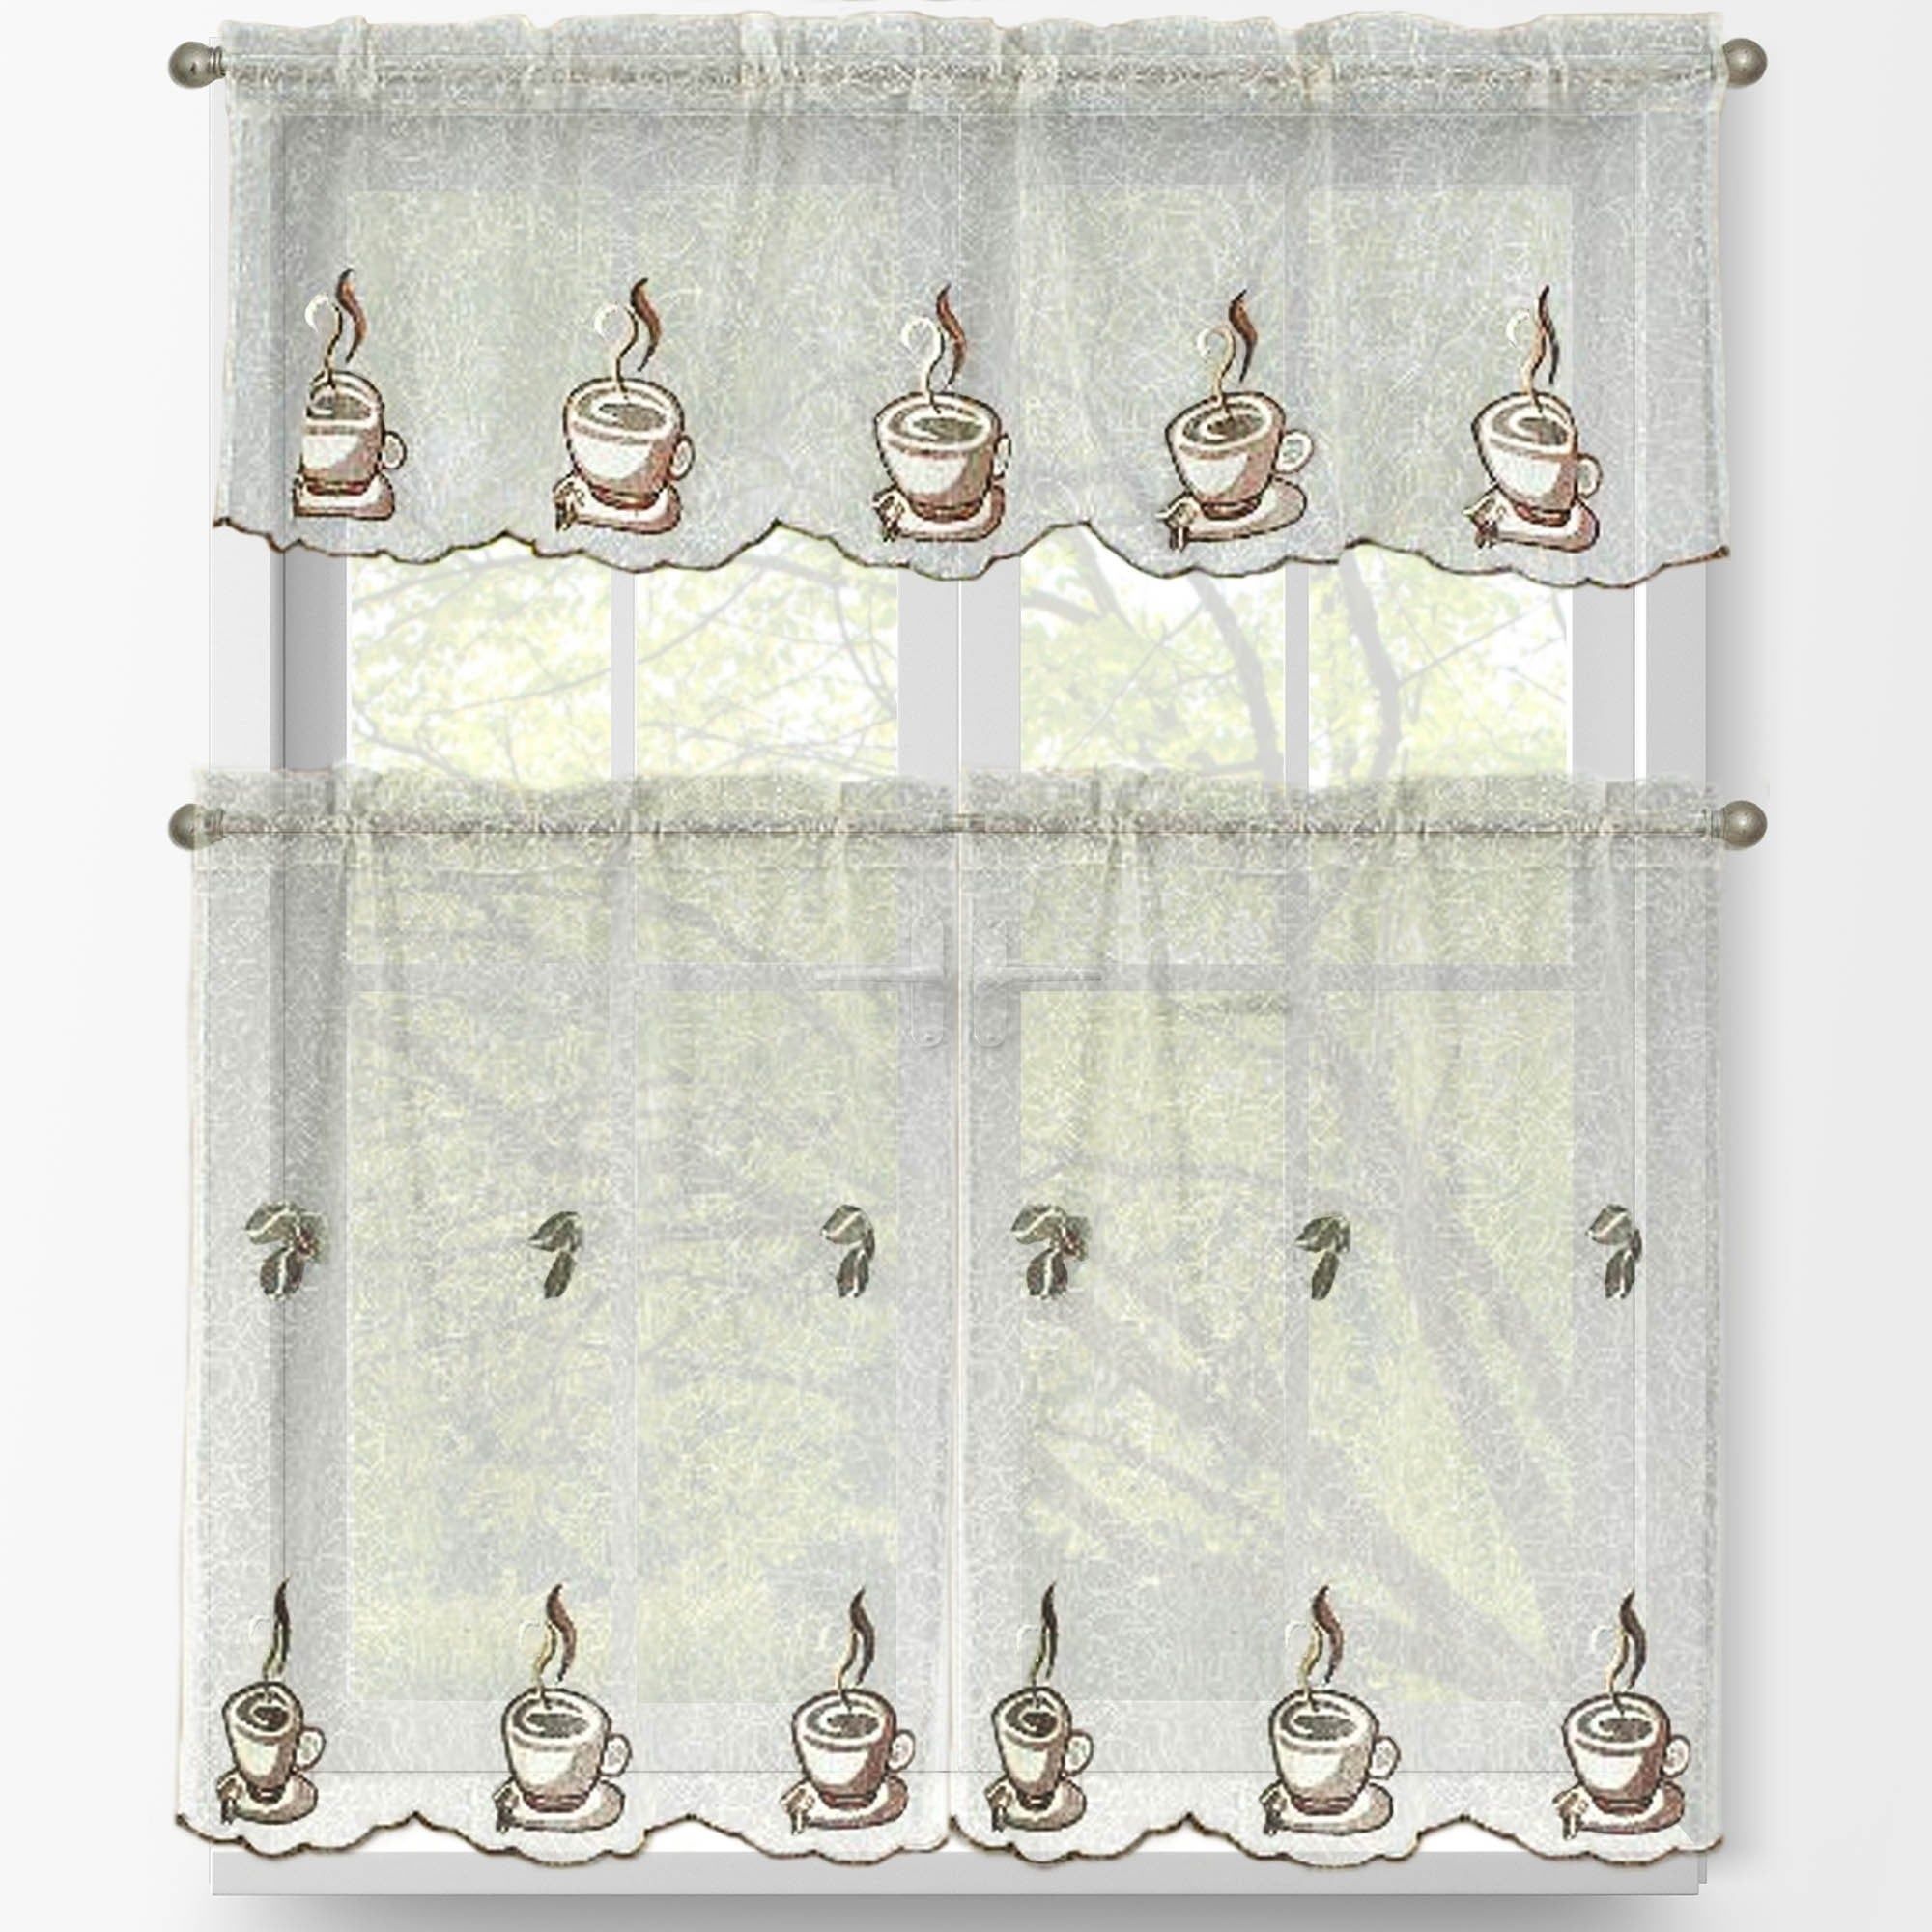 Window Elements Embroidered 3 Piece Kitchen Tier And Valance Set Regarding Coffee Drinks Embroidered Window Valances And Tiers (View 4 of 20)